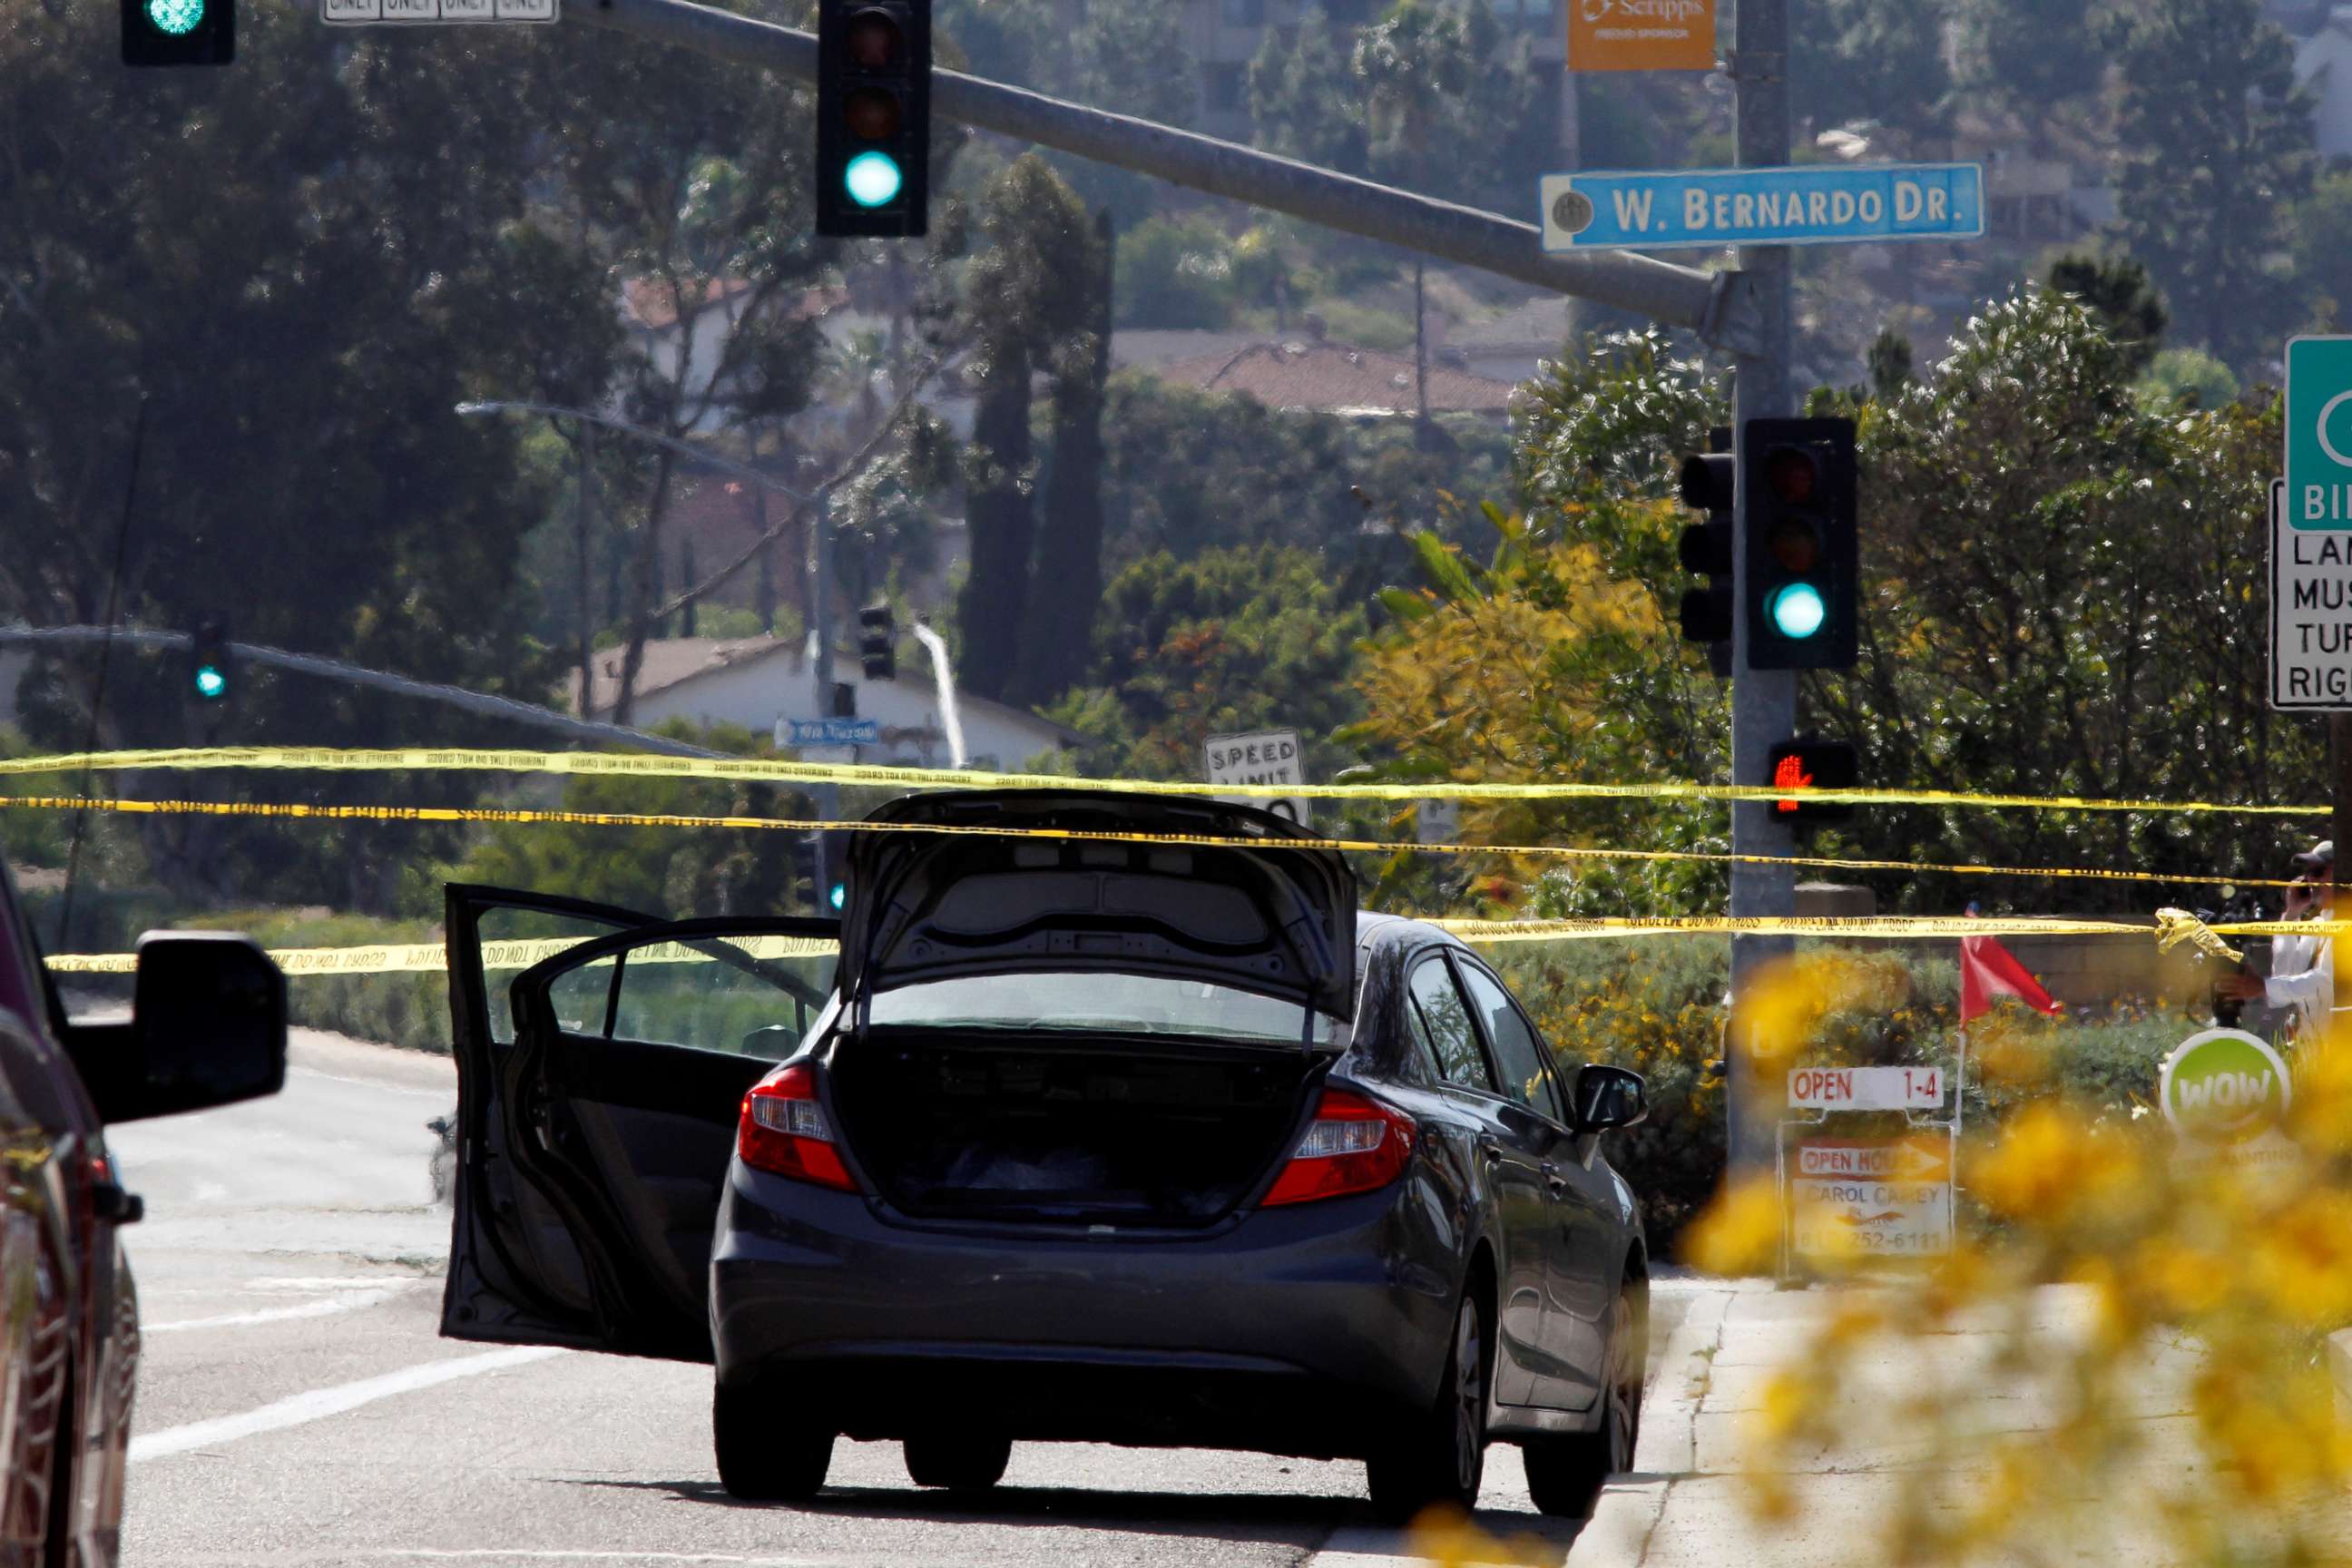 PHOTO: A car, allegedly used by the gunman who killed one at the Congregation Chabad synagogue in Poway, is pictured, few hundred feet from the Interstate 15 off-ramp north of San Diego, Calif. April 27, 2019.  